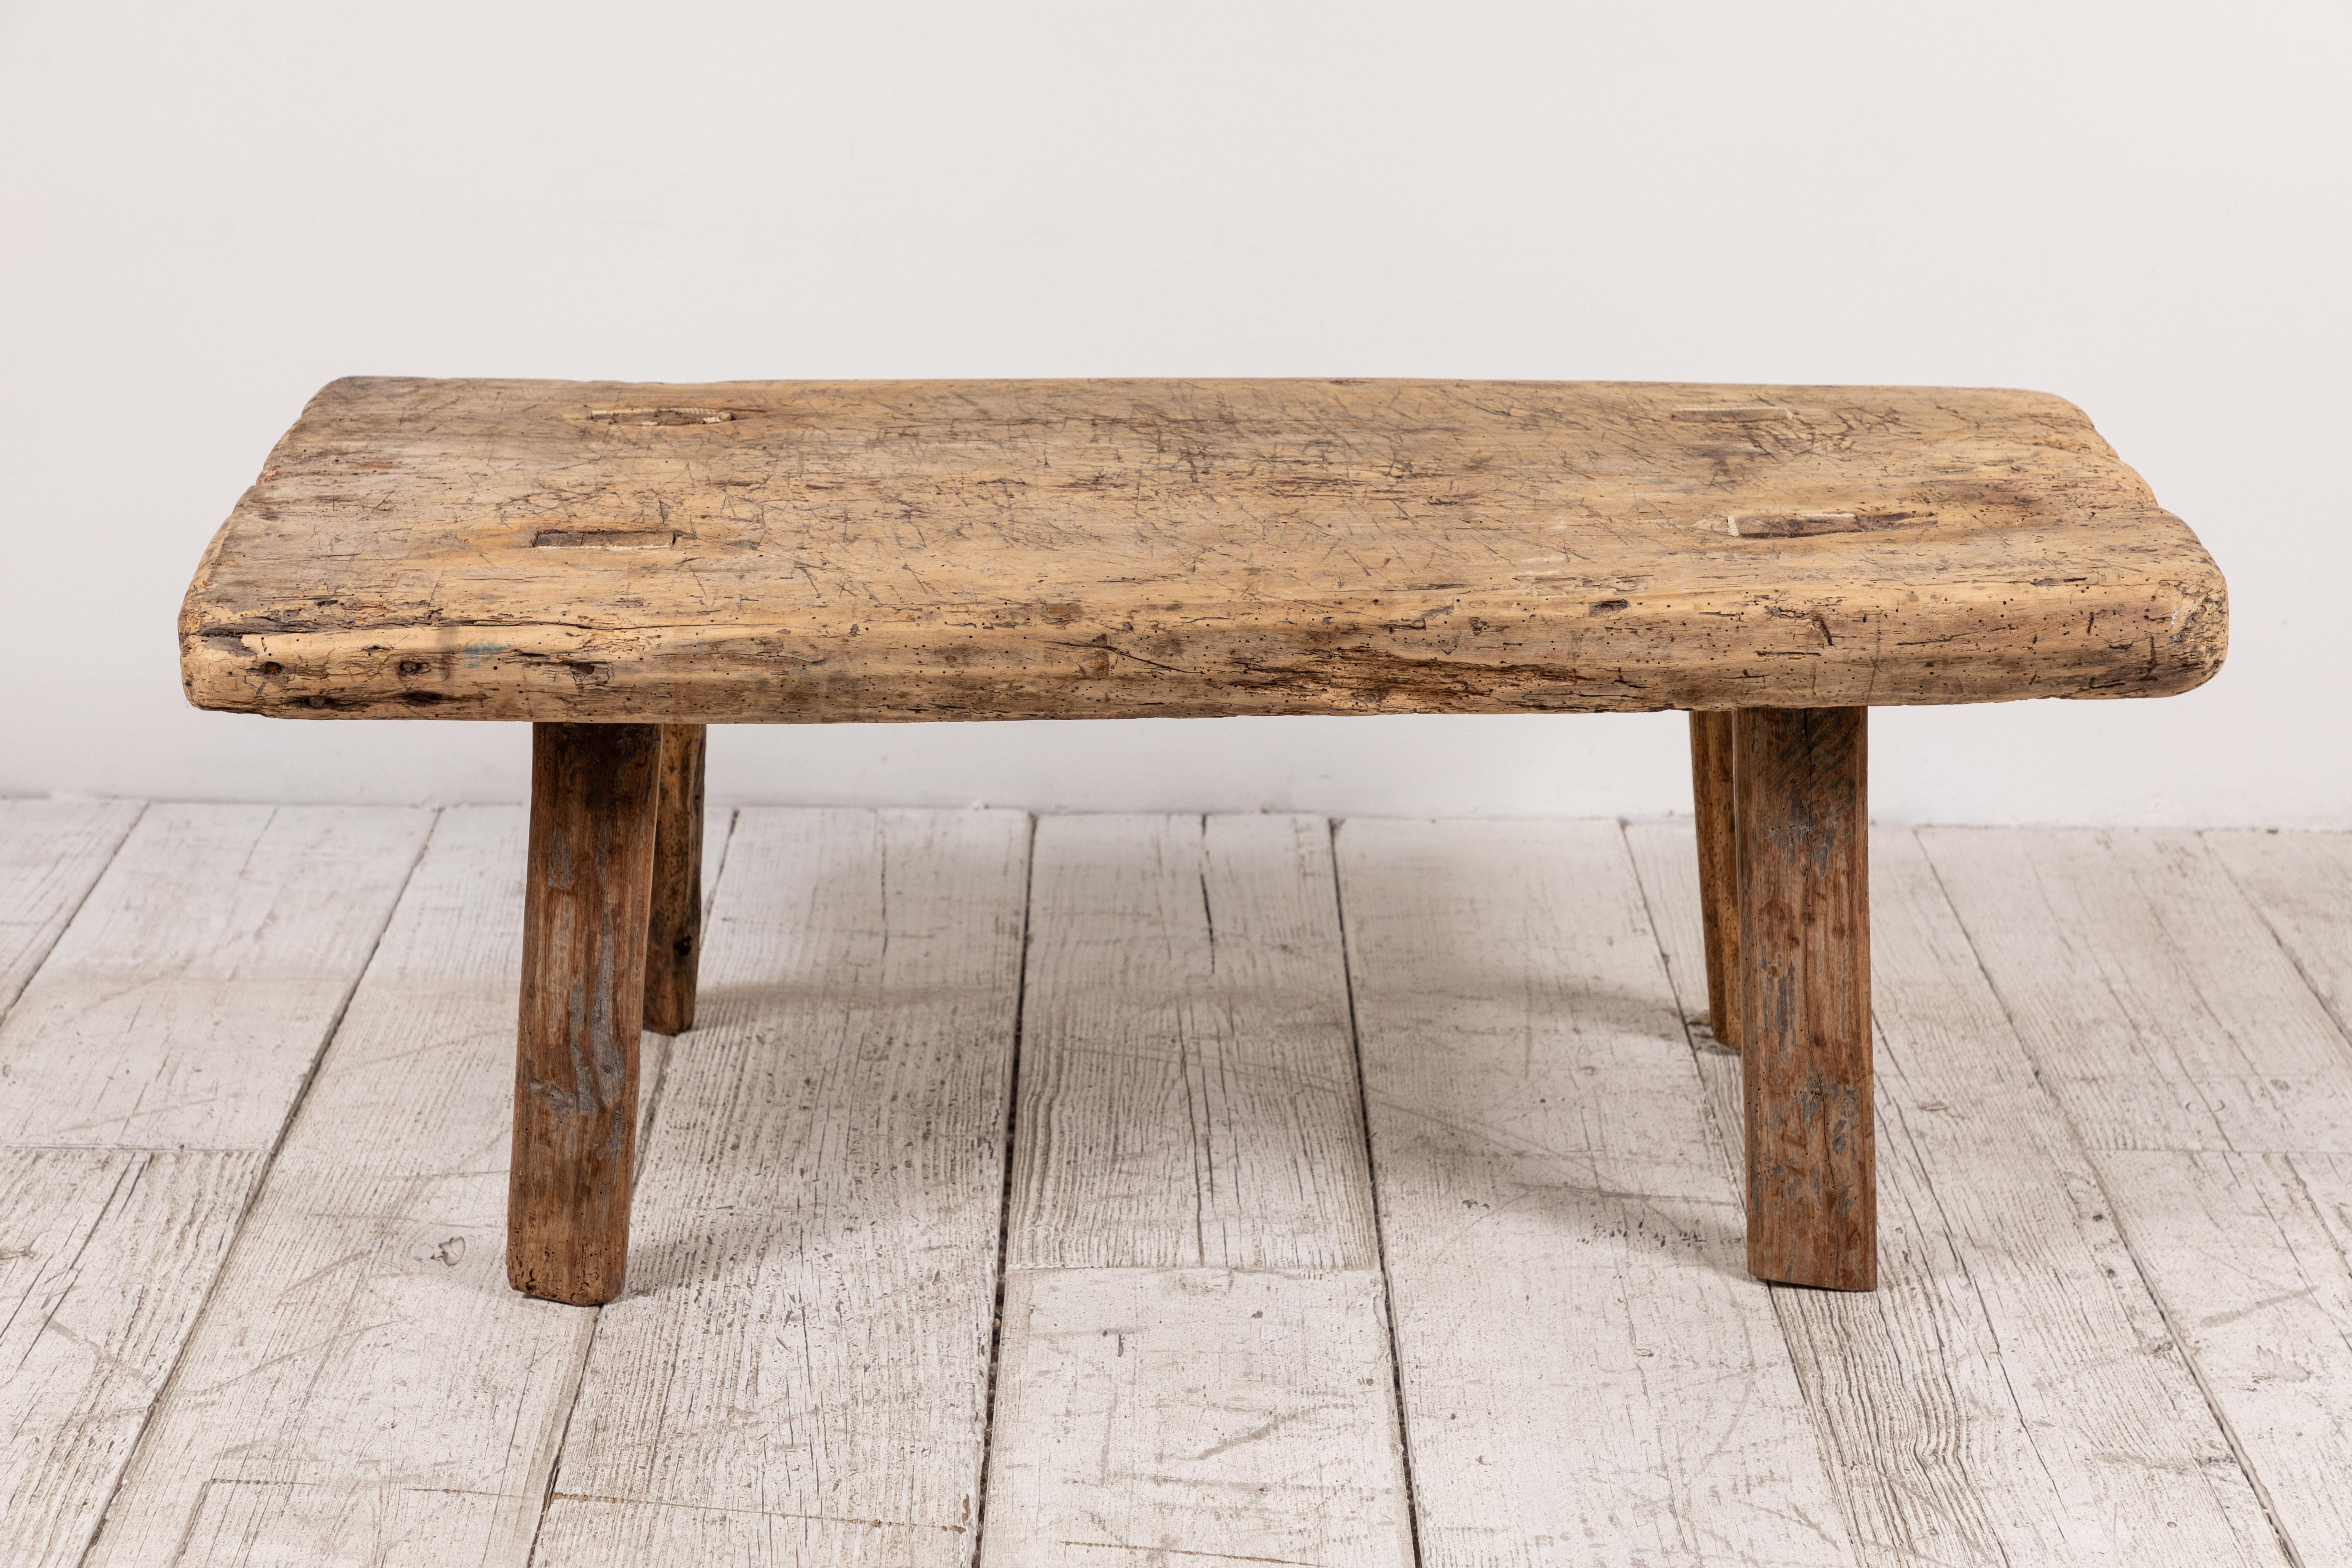 Primitive French wooden table with four splayed legs. The wood is old and offers unique grain.